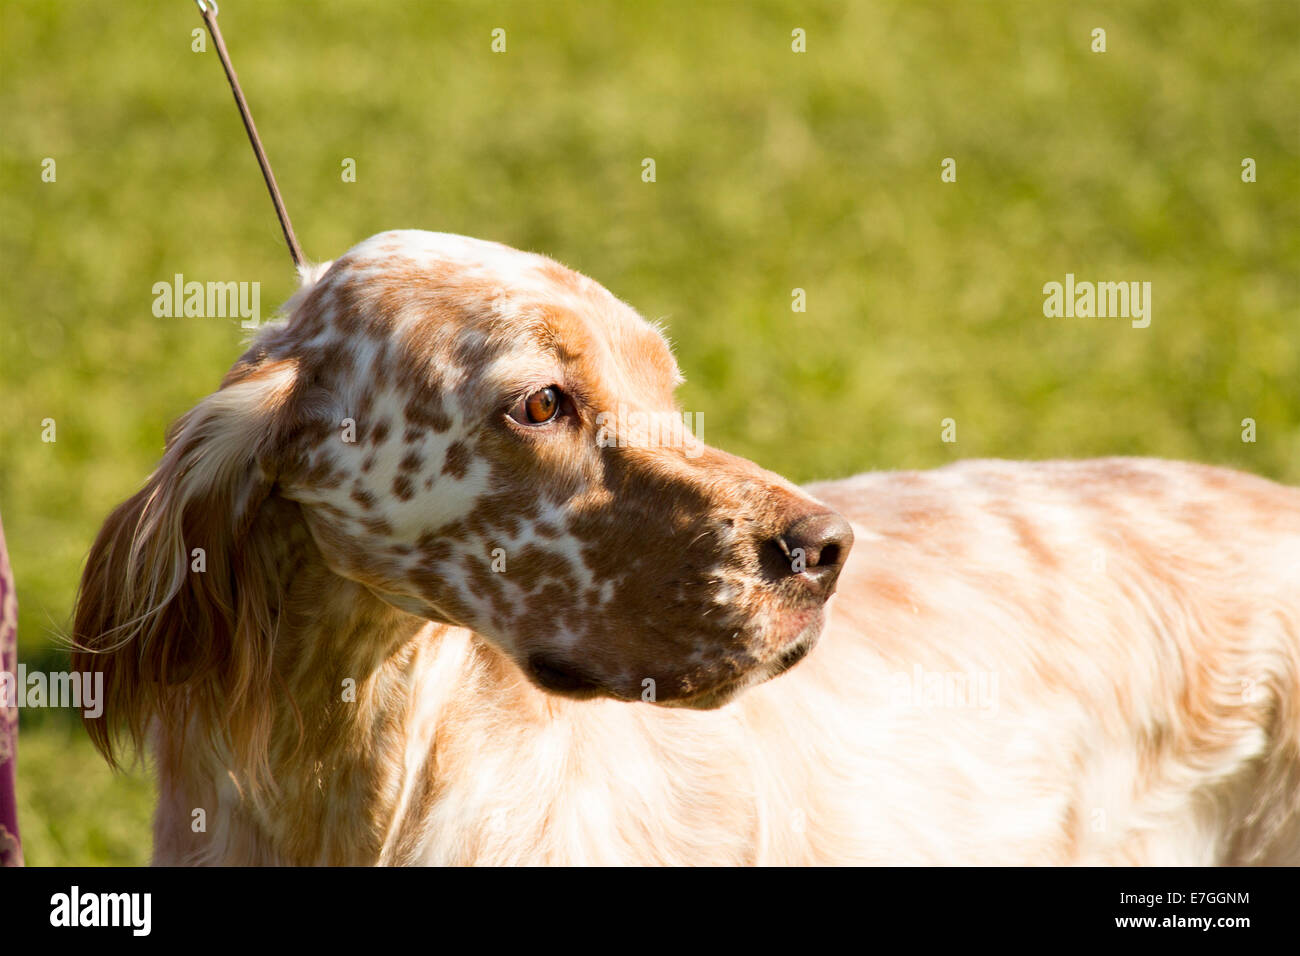 English Setter Dog in show ring looking back Stock Photo